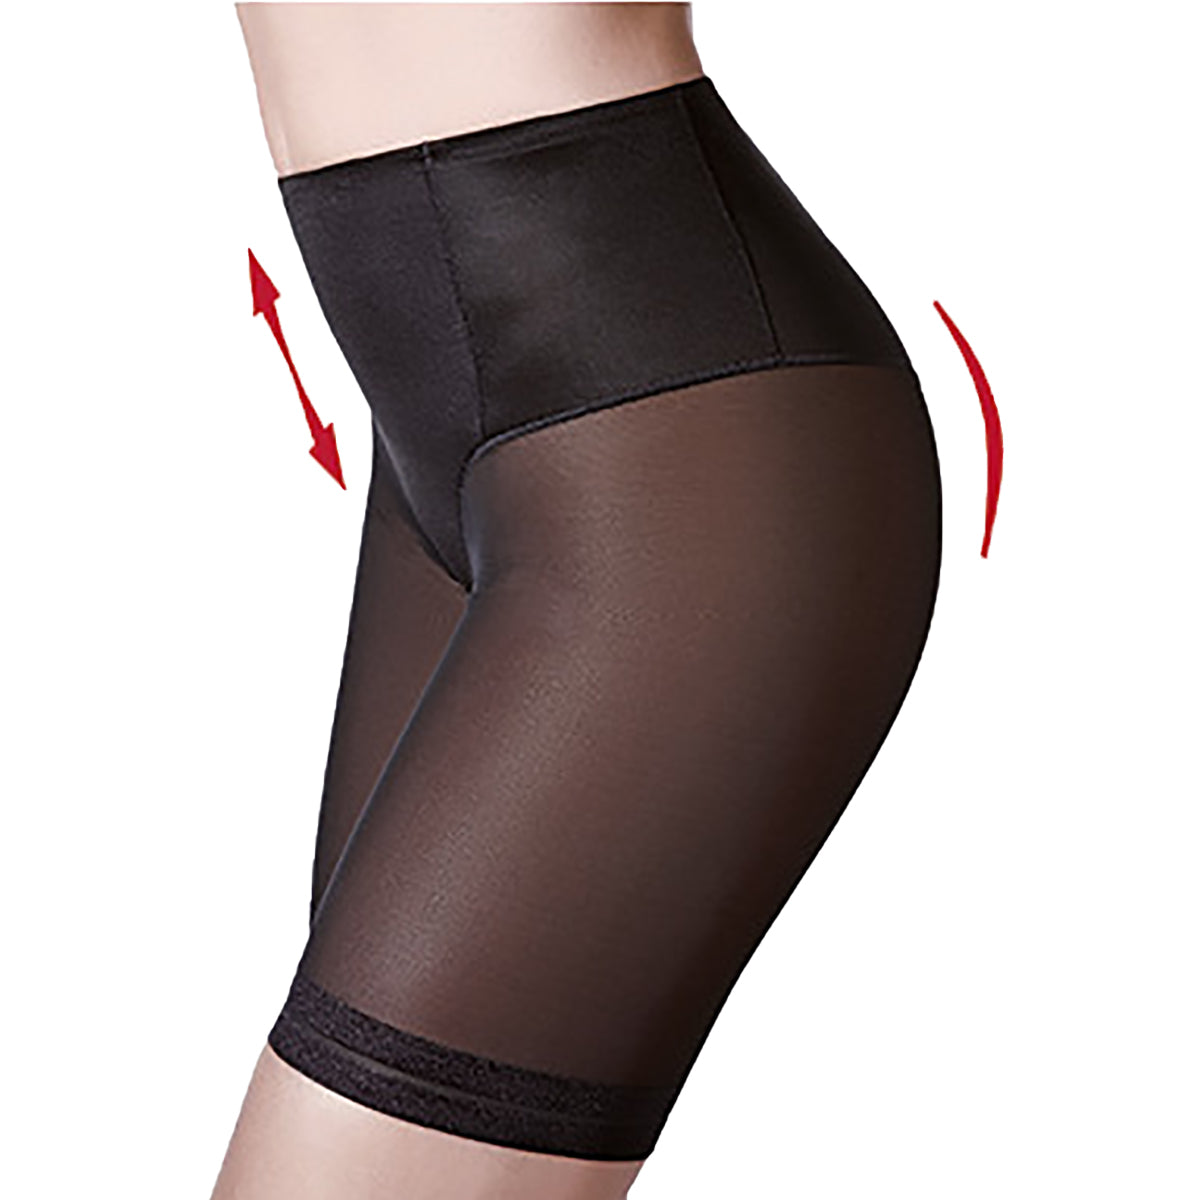 Assets By Spanx Women's High-waist Perfect Pantyhose - Sierra 2